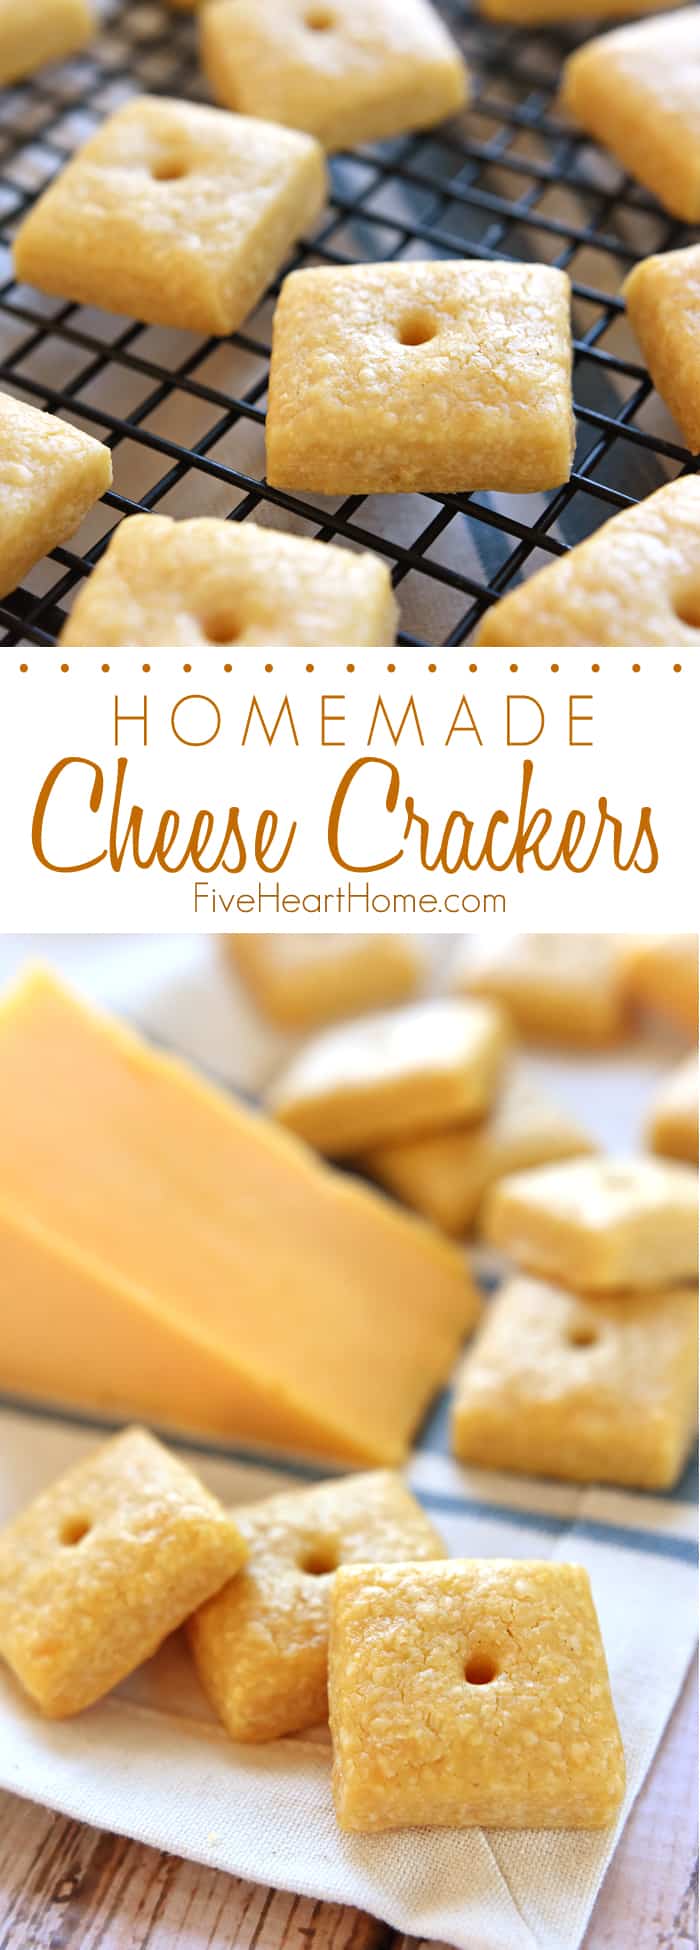 Homemade Cheese Crackers ~ tasty and all-natural, these savory crackers are not only kid approved, but you won't believe how easy they are to make! | FiveHeartHome.com via @fivehearthome